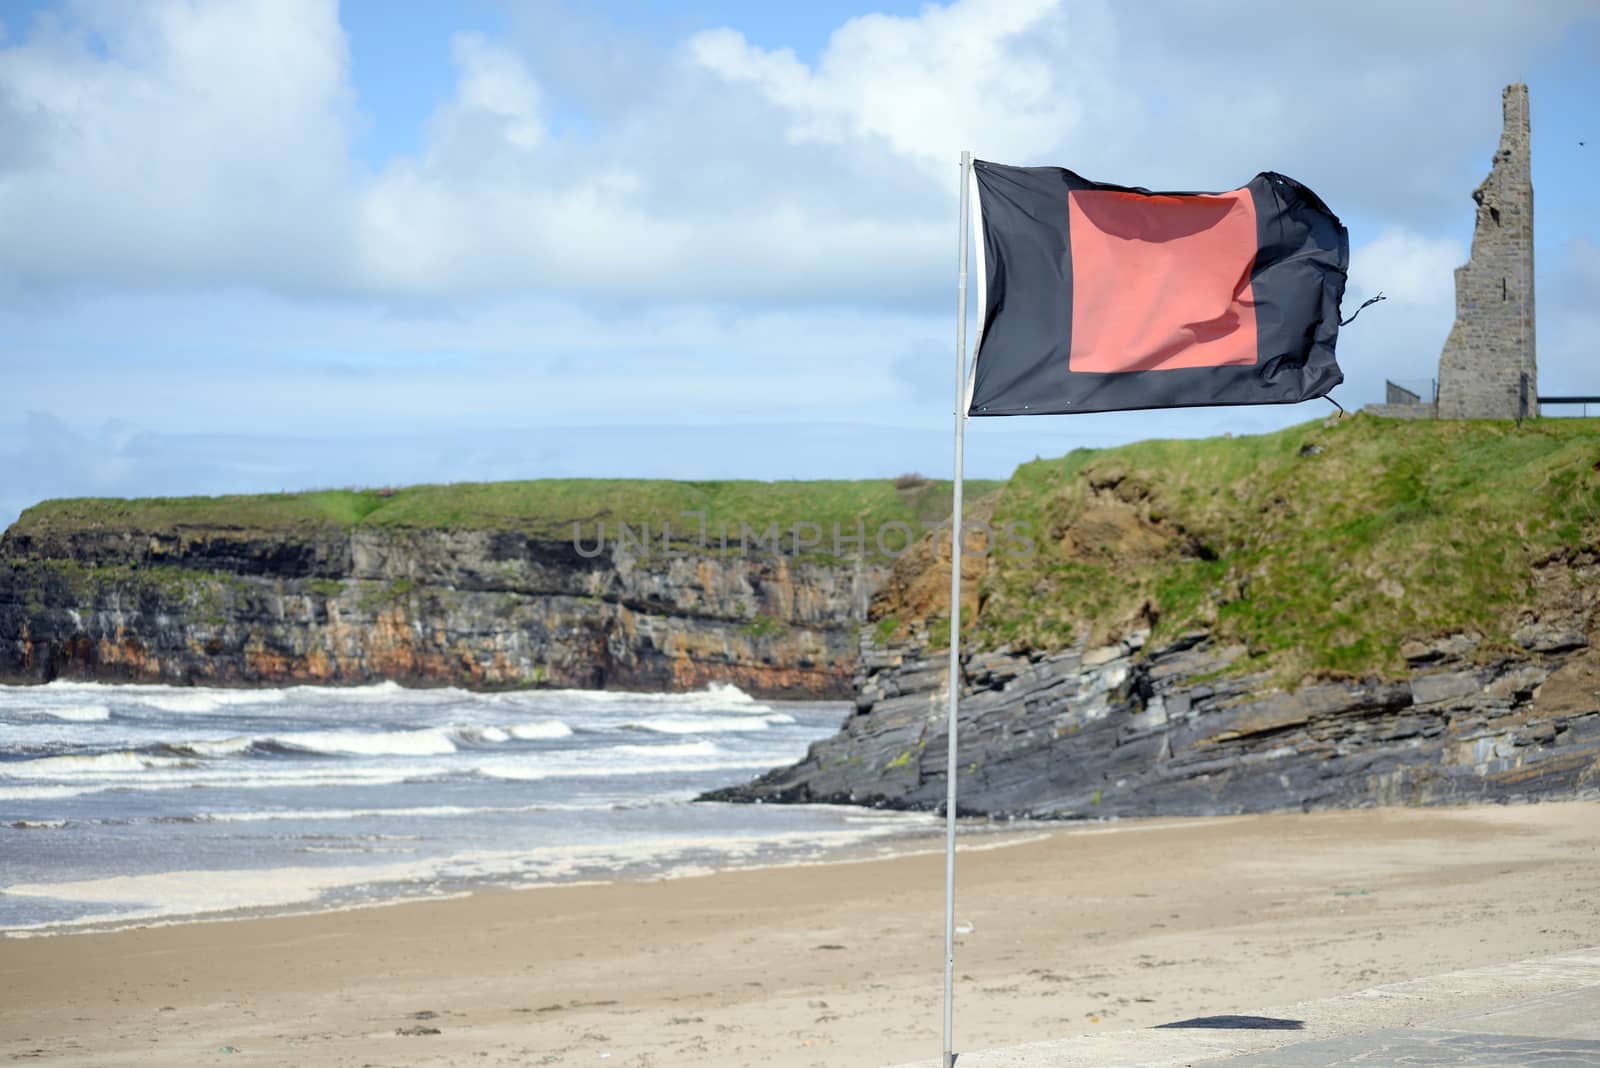 quicksilver flag flying beside surf school with ballybunion castle in background